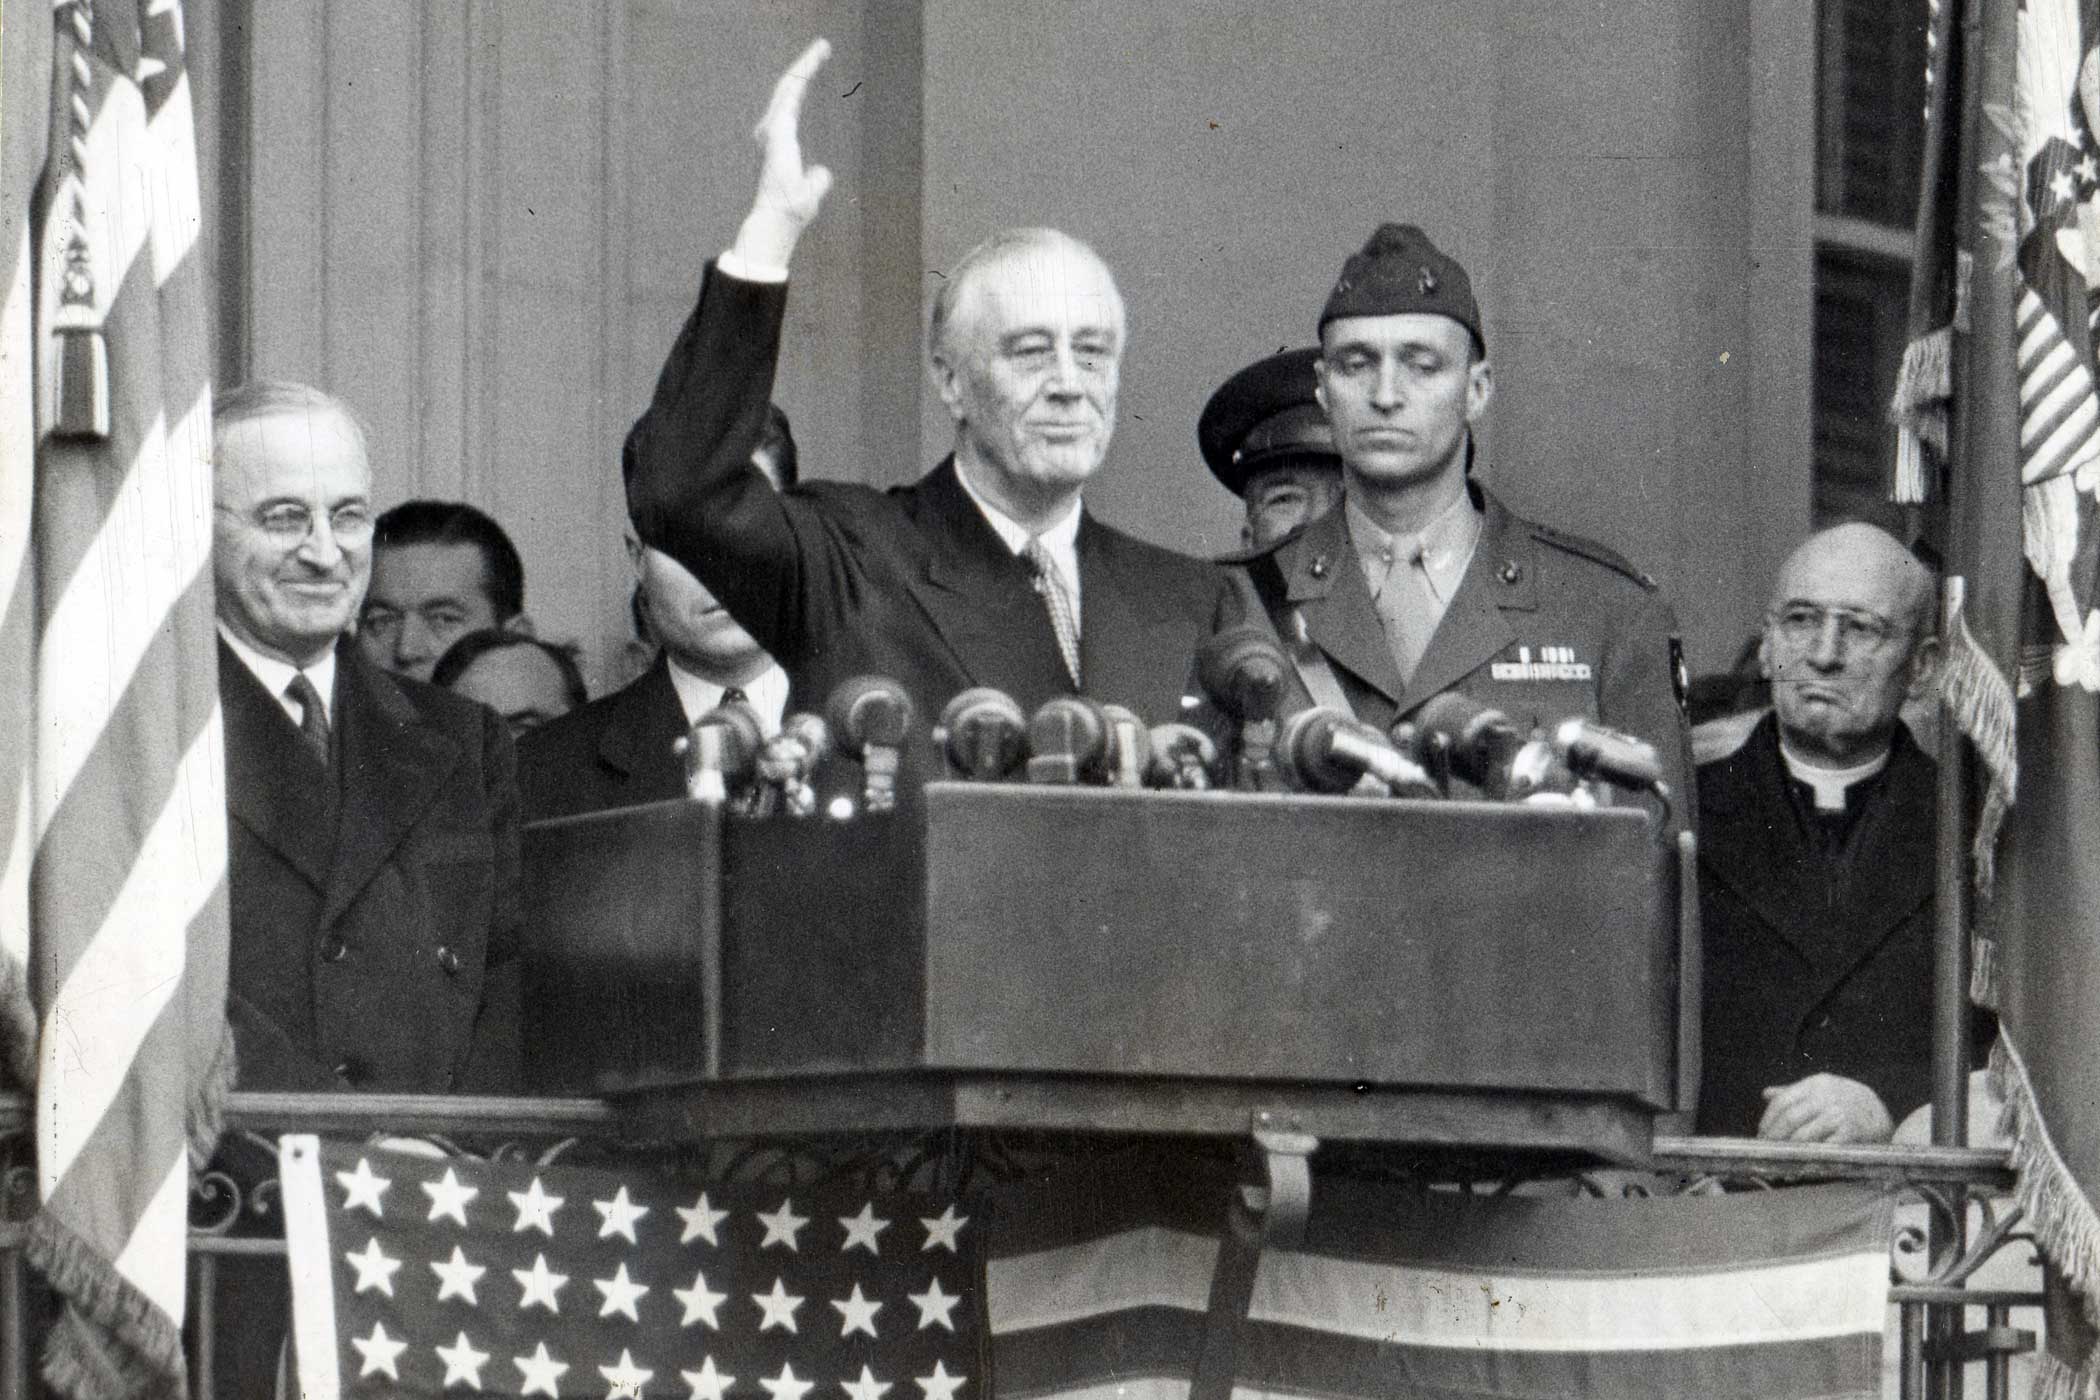 President Franklin Delano Roosevelt waves from a lectern just after he took his fourth Oath of Office in Washington in 1945. With him are his Vice President Harry S. Truman and his son James Roosevelt. Roosevelt, the longest serving president in American history, was the only president to serve more than two terms.